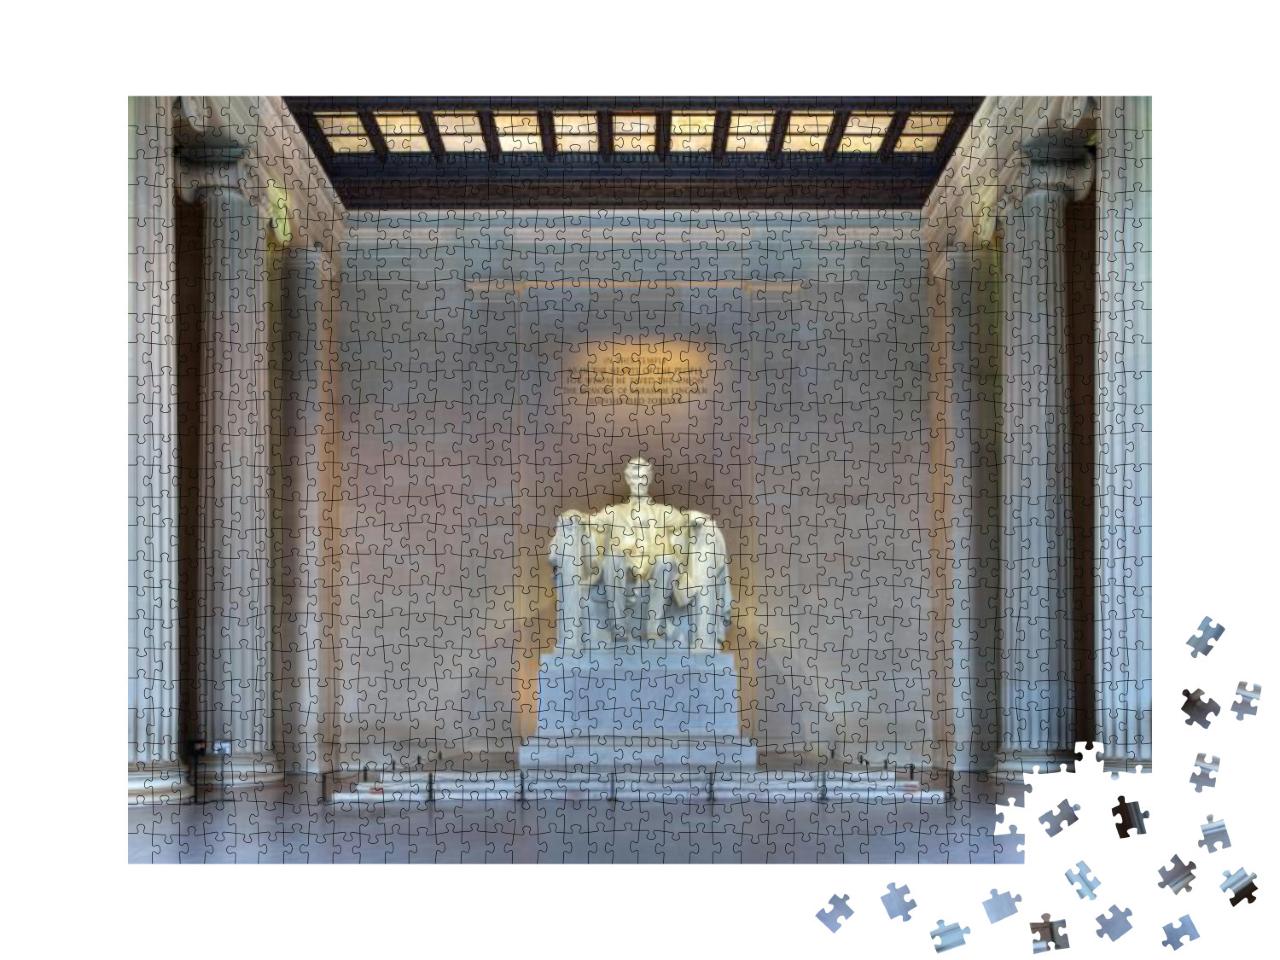 Lincoln Memorial, Hdr Image of the Shrine Interior - Wash... Jigsaw Puzzle with 1000 pieces